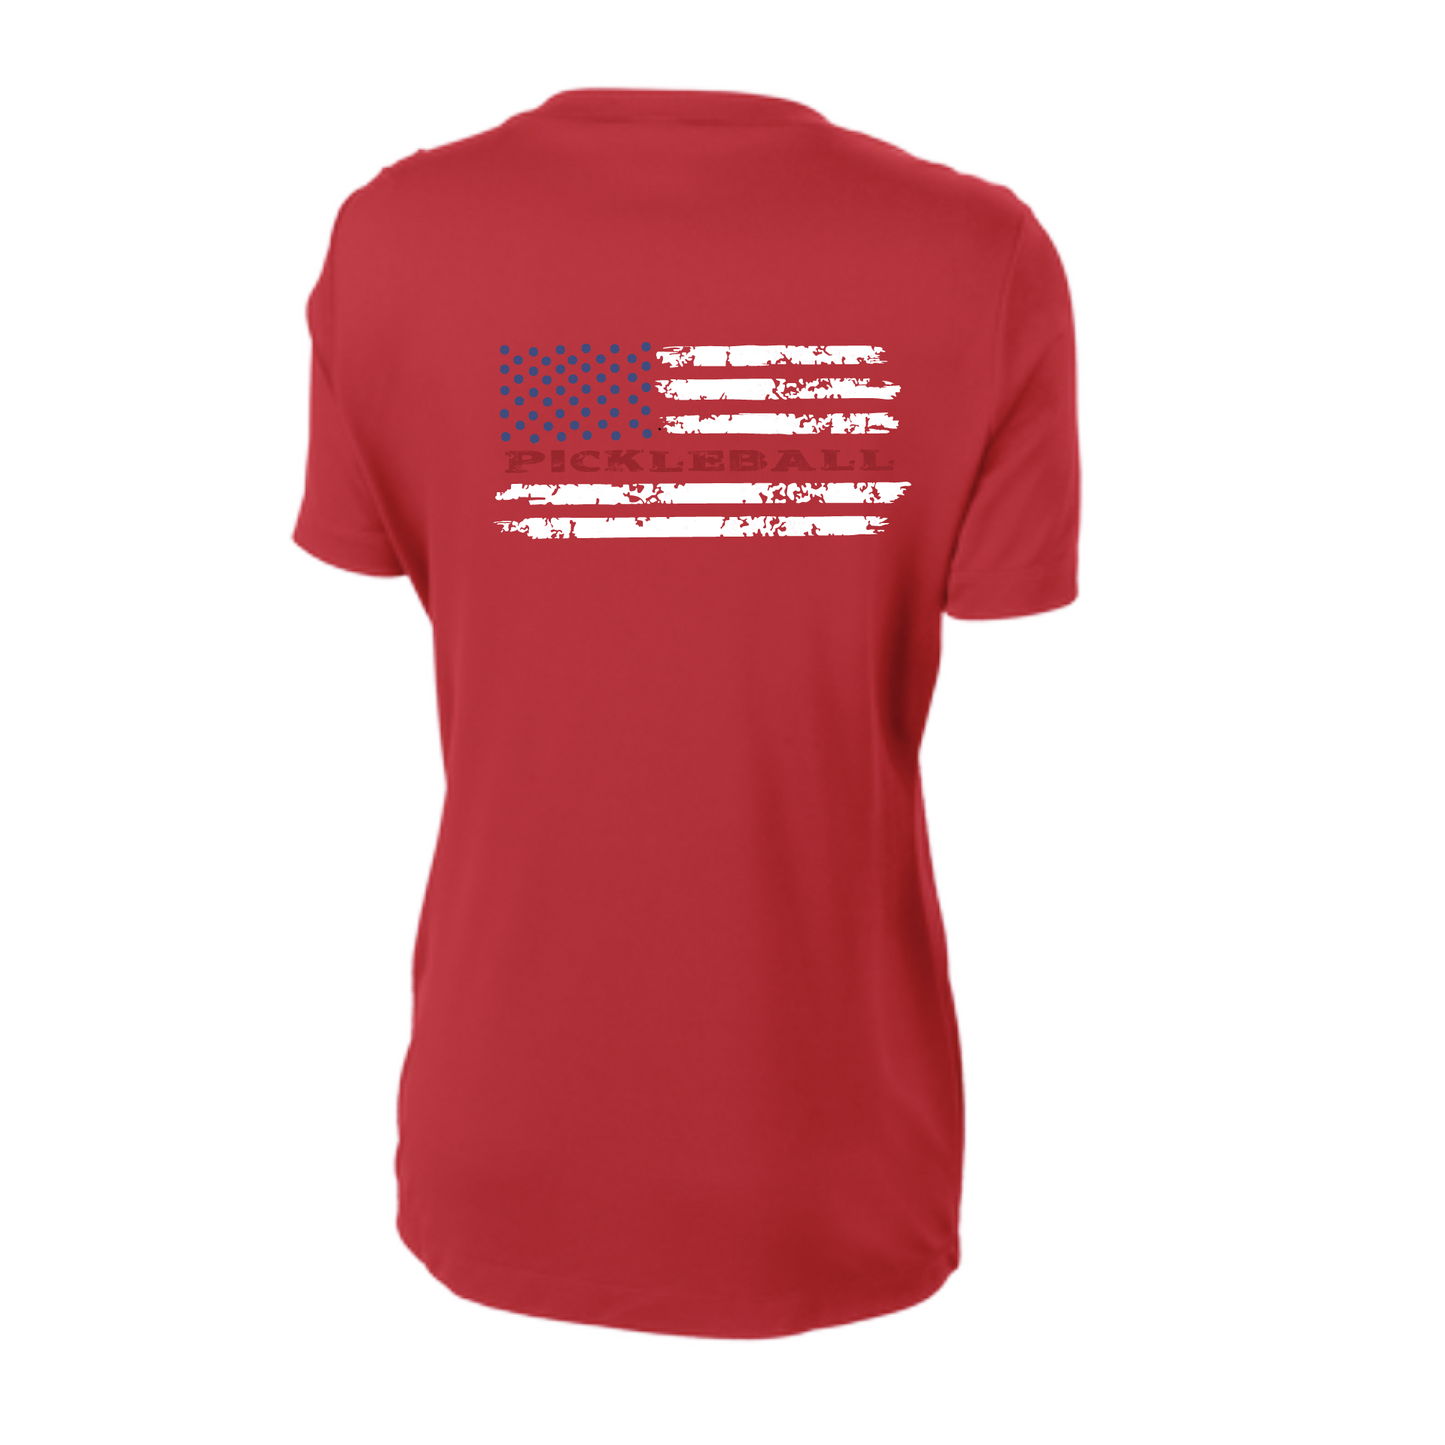 Pickleball Design: Flag Horizontal on Front or Back of Shirt  Women's Style: Short-Sleeve V-Neck  Turn up the volume in this Women's shirt with its perfect mix of softness and attitude. Material is ultra-comfortable with moisture wicking properties and tri-blend softness. PosiCharge technology locks in color. Highly breathable and lightweight.